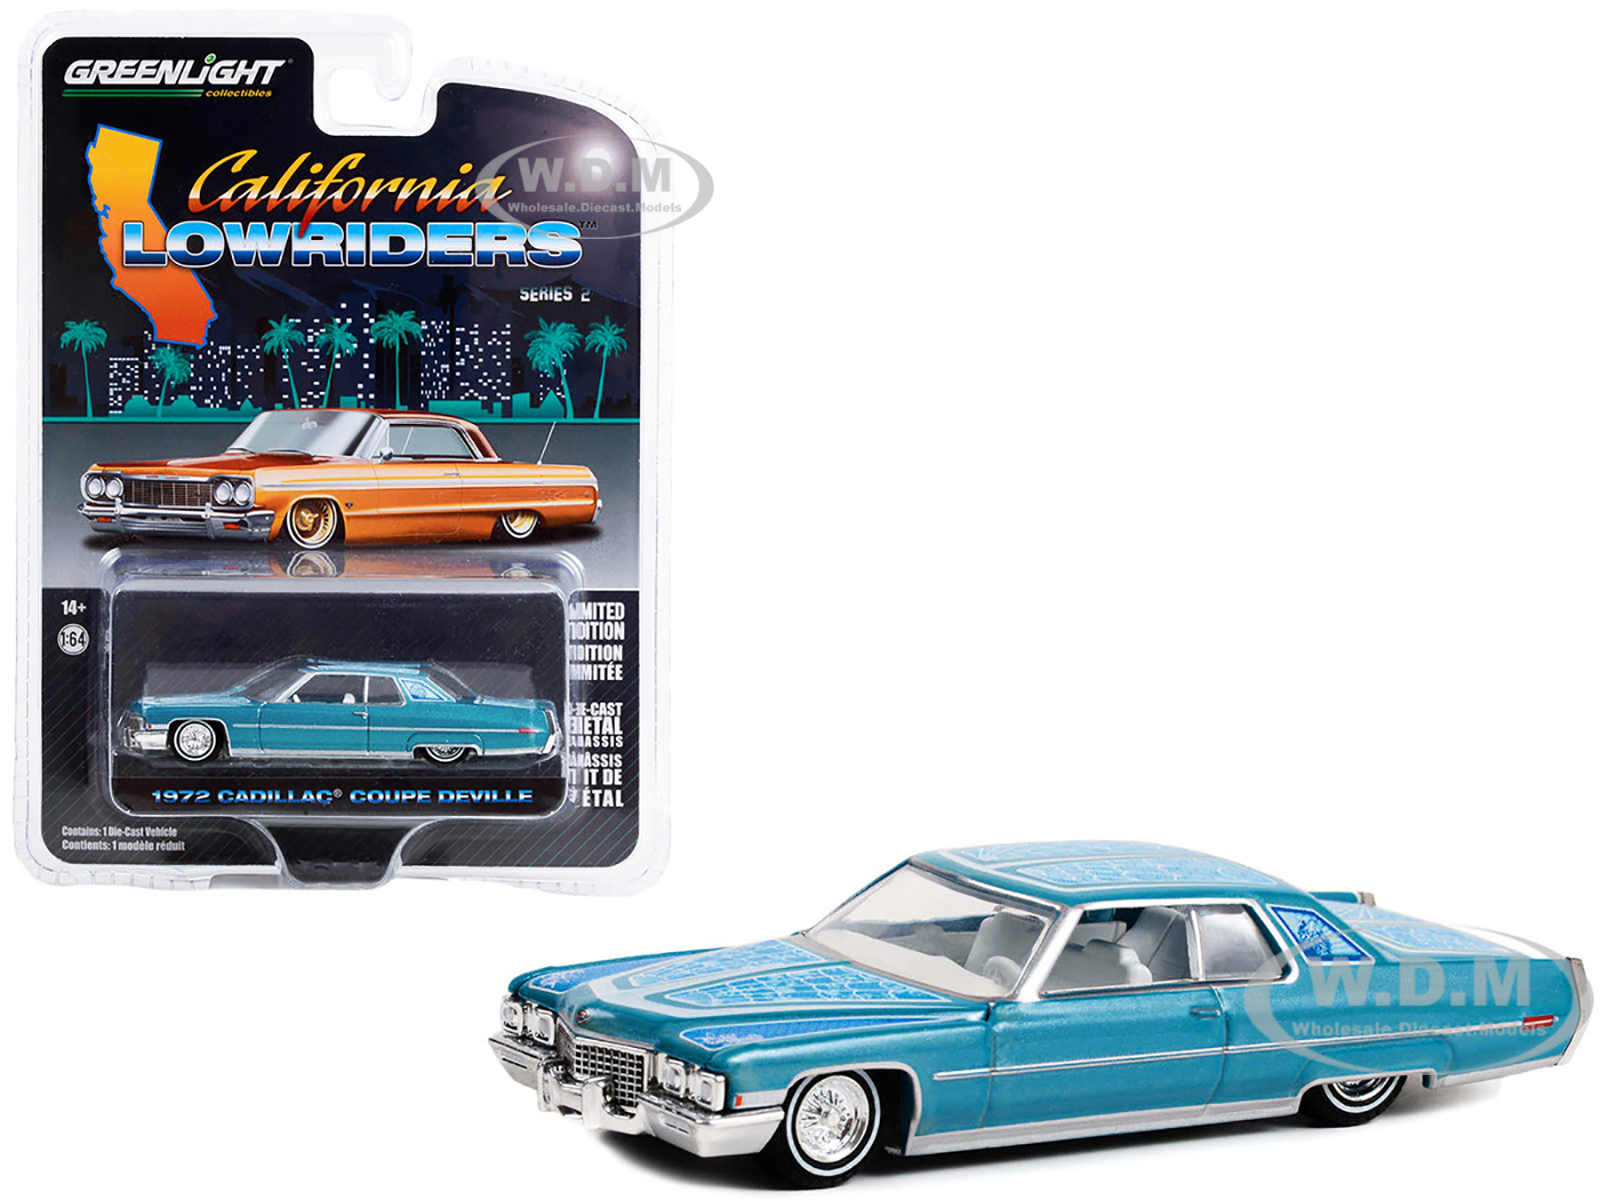 1972 Cadillac Coupe DeVille Custom Light Blue Metallic with White Interior and Graphics California Lowriders Series 2 1/64 Diecast Model Car by Greenlight